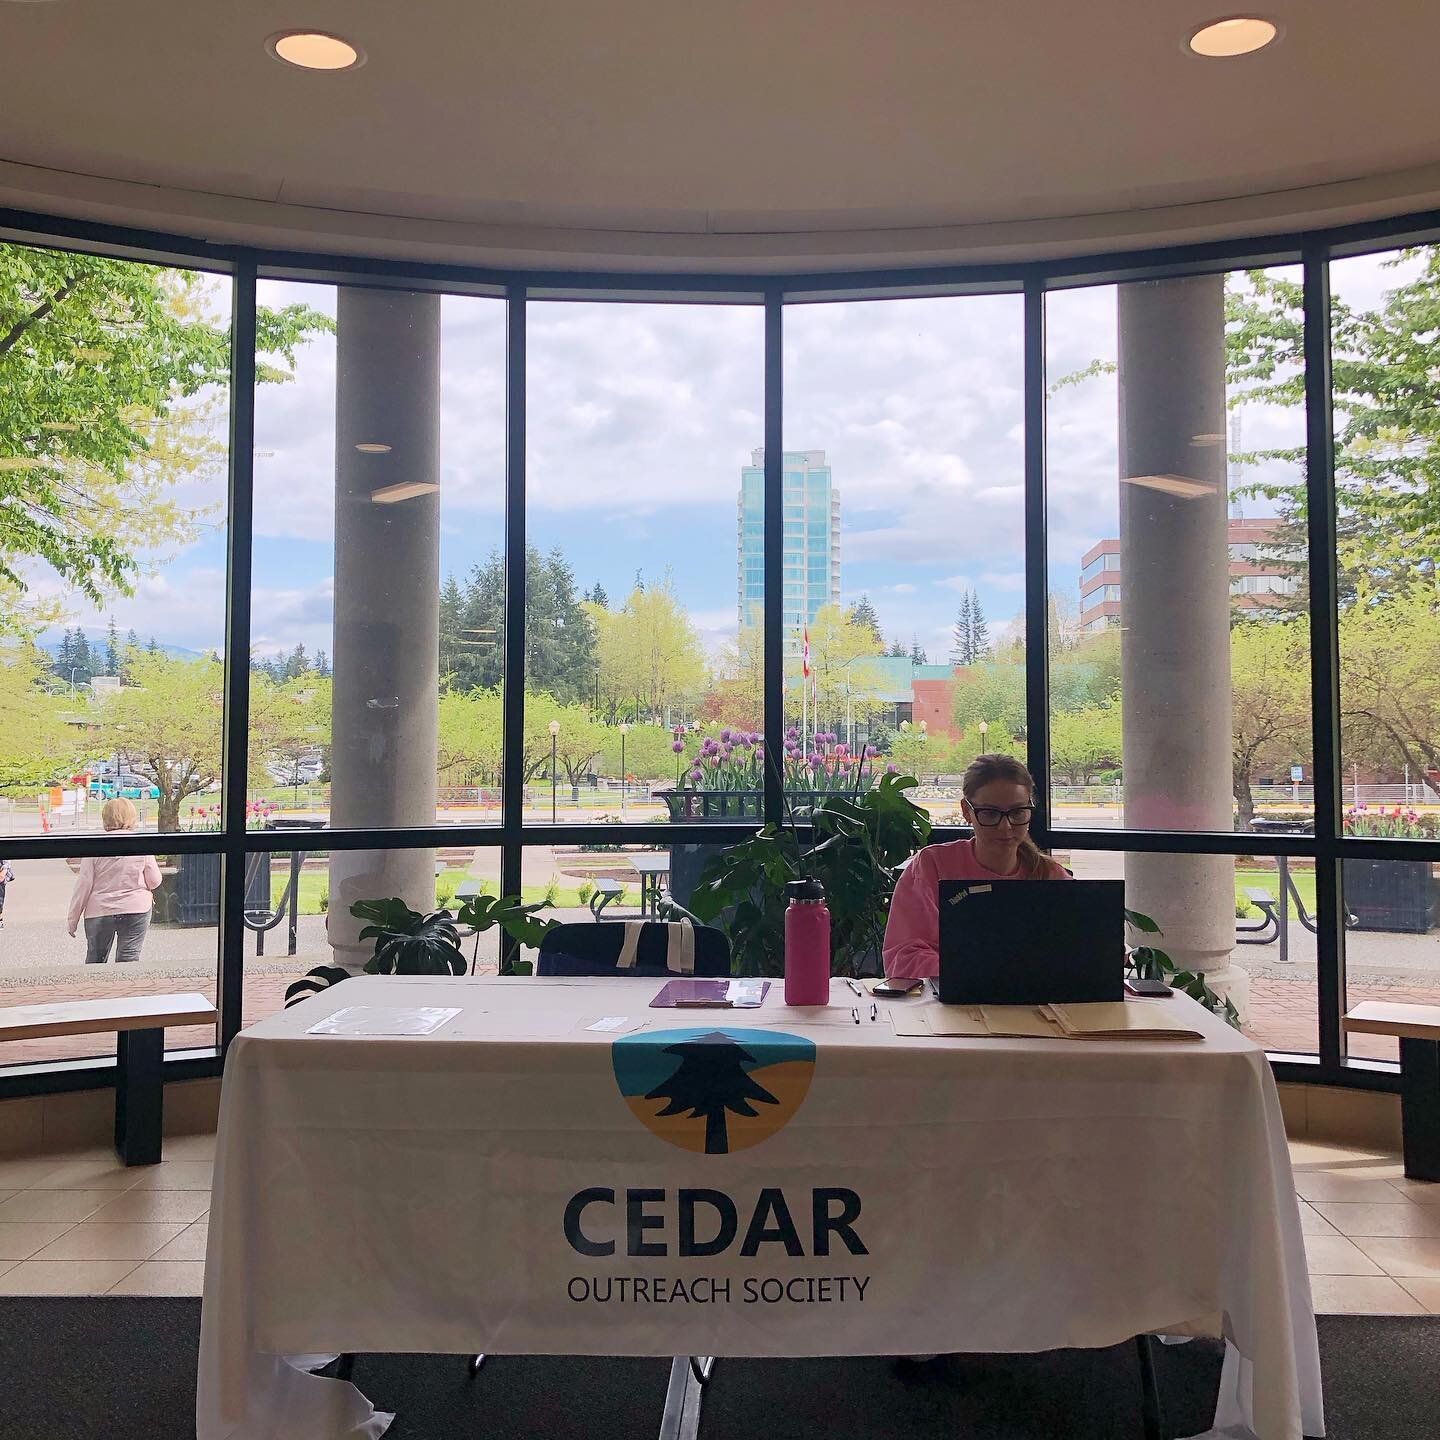 CEDAR Outreach at Clearbrook Library yesterday! According to the librarians here, approximately 20 unsheltered individuals regularly access this library. Libraries are one of the only places left where people can just exist without being expected to 